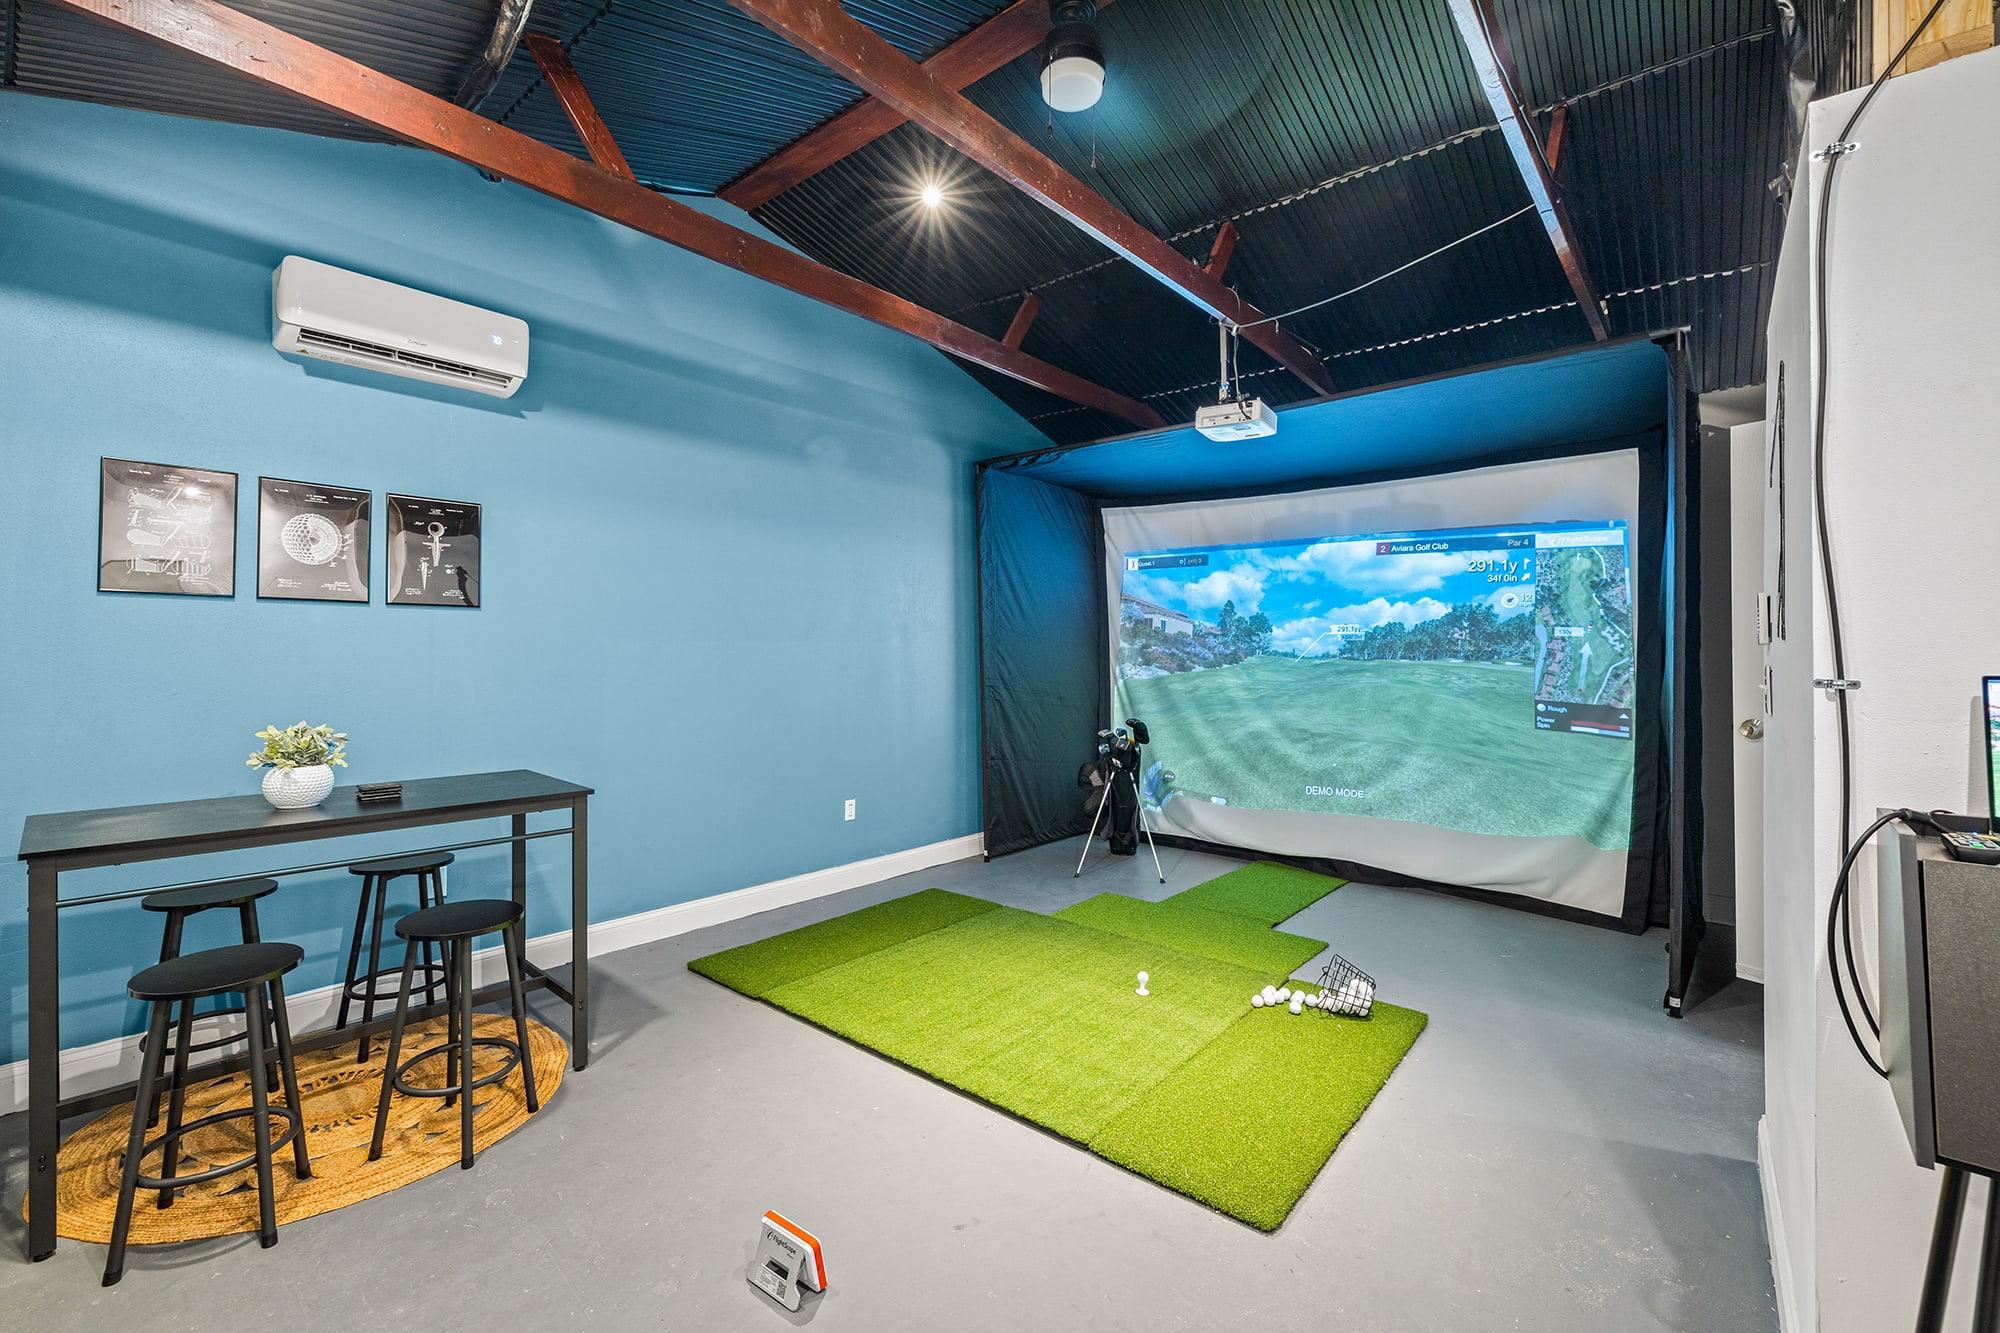 Indoor Golf Simulator with bar to enjoy for all!